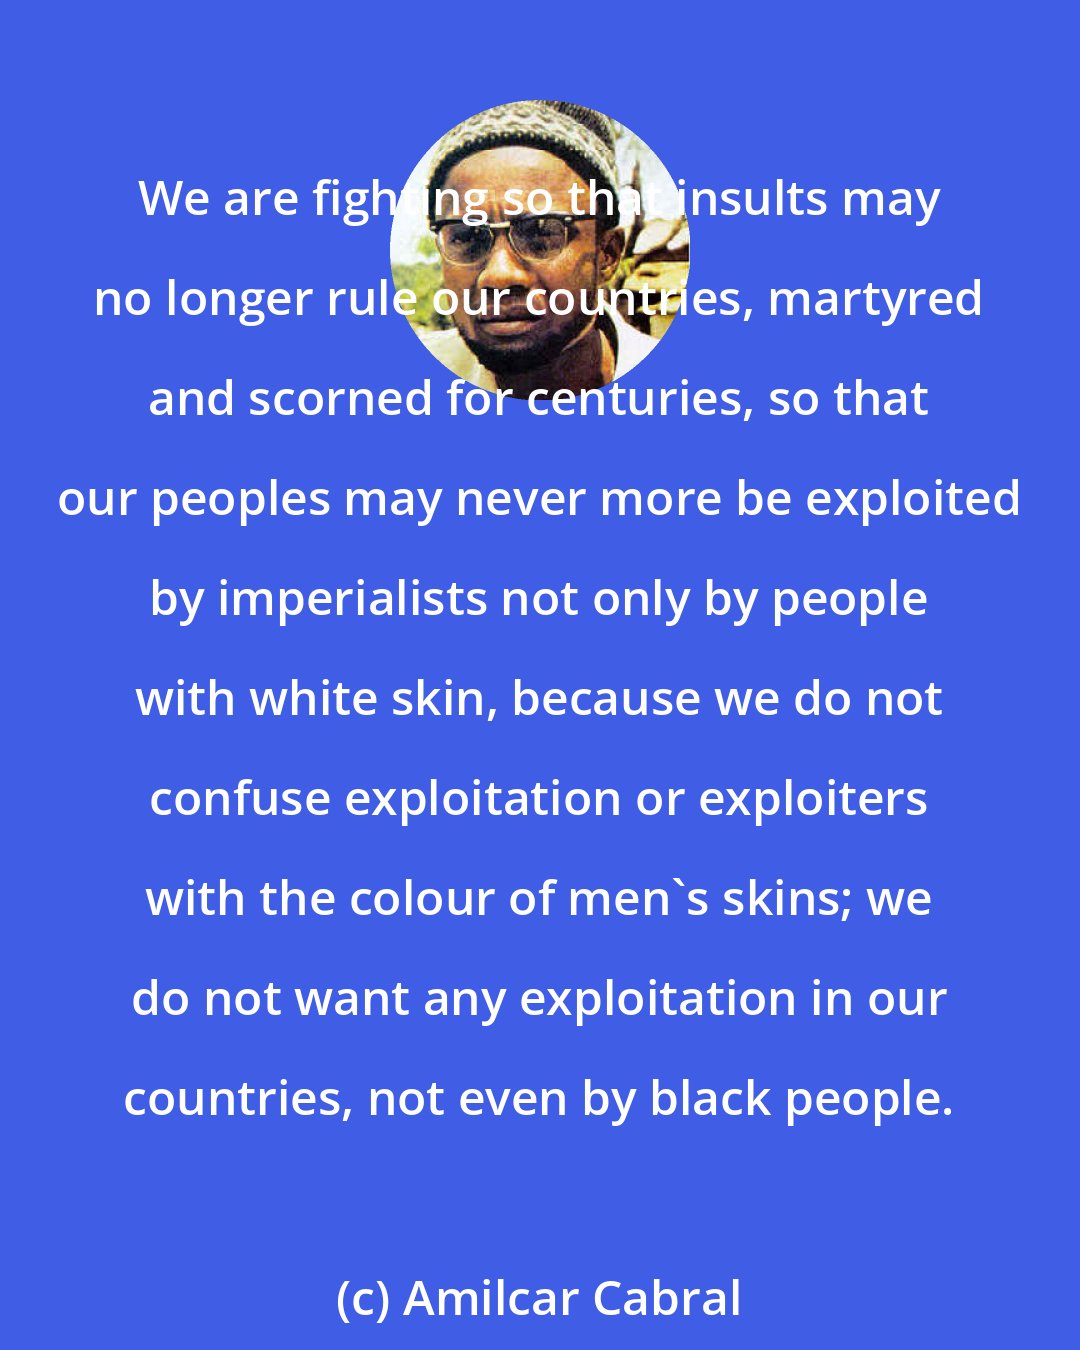 Amilcar Cabral: We are fighting so that insults may no longer rule our countries, martyred and scorned for centuries, so that our peoples may never more be exploited by imperialists not only by people with white skin, because we do not confuse exploitation or exploiters with the colour of men's skins; we do not want any exploitation in our countries, not even by black people.